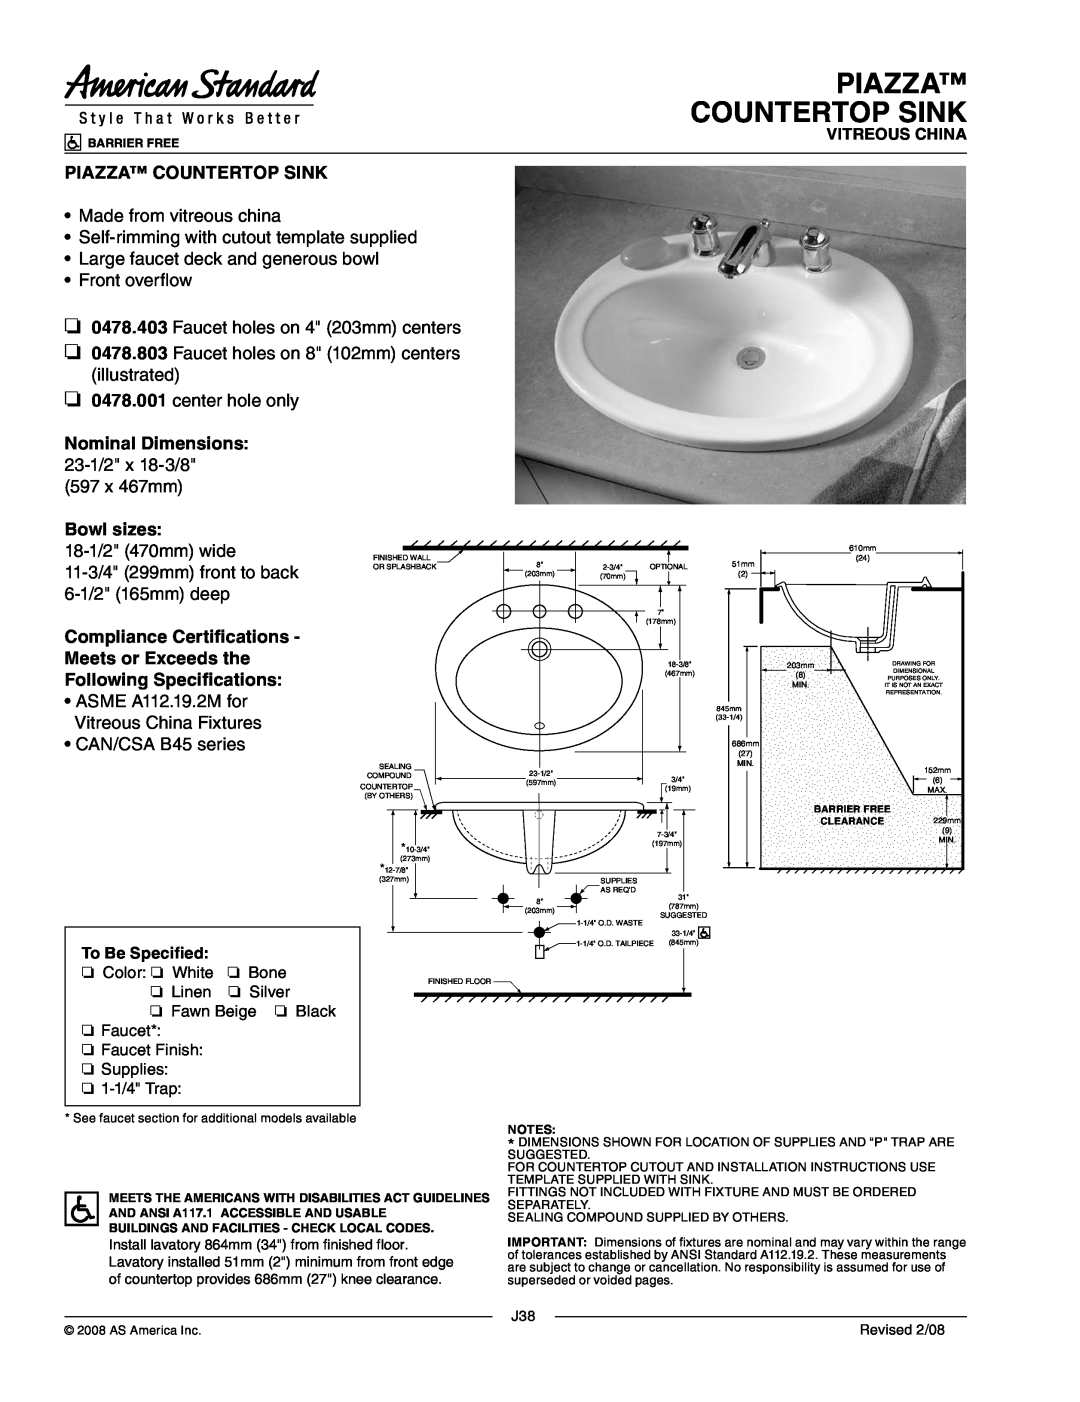 American Standard 0478.403, 0478.803 dimensions Piazza Countertop Sink, Nominal Dimensions 23-1/2x 18-3/8, Bowl sizes 